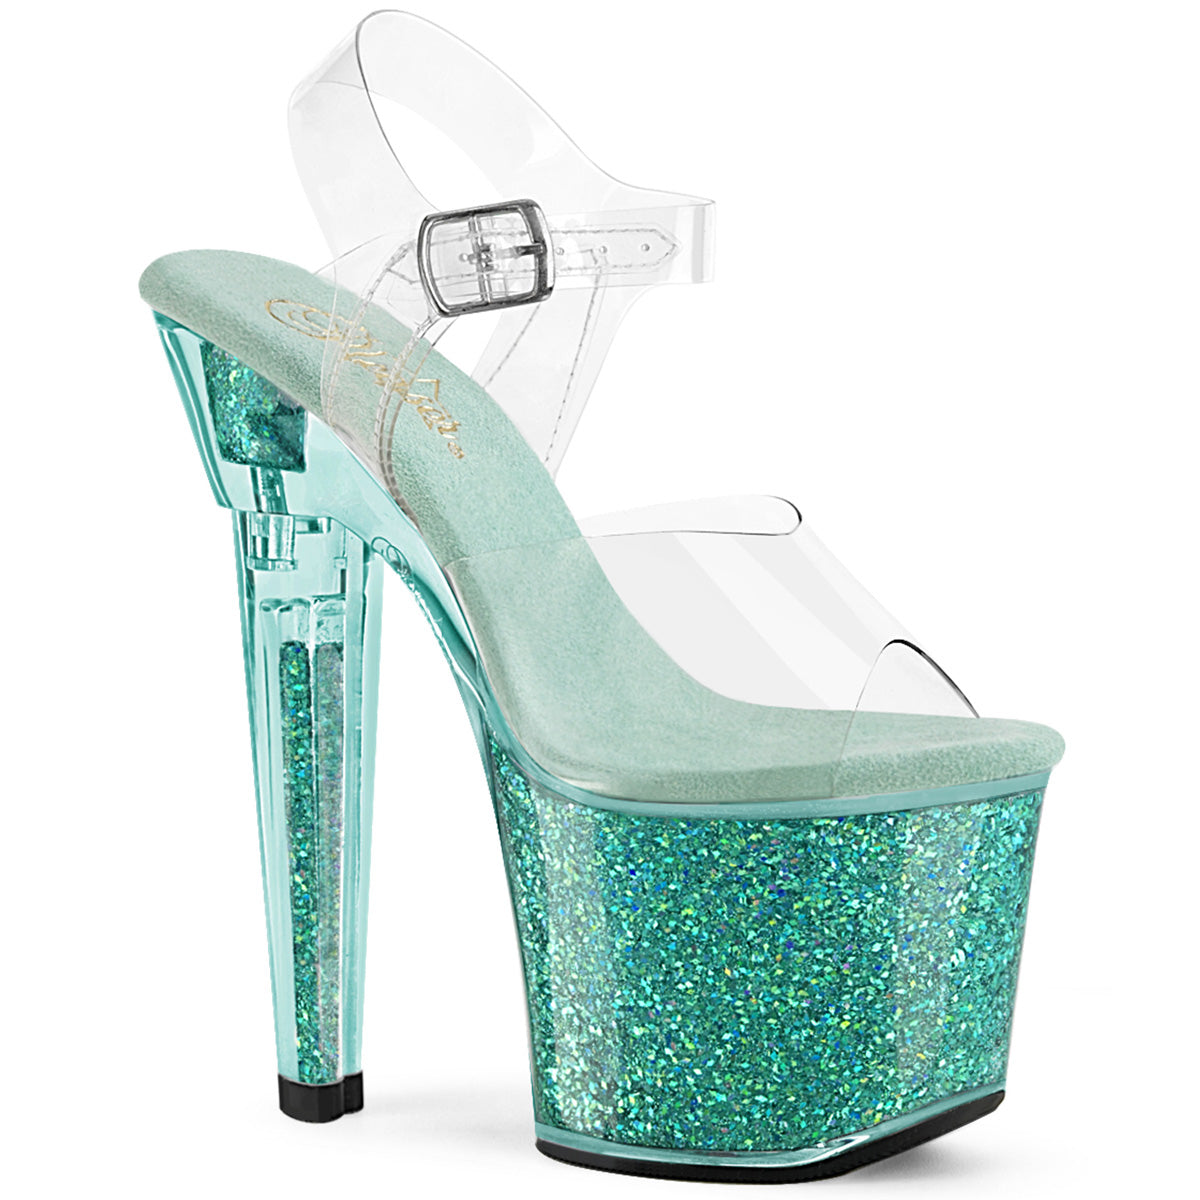 LOVESICK-708SG Pleaser Sexy 7 Inch Pole Dancing Glitter Shoes